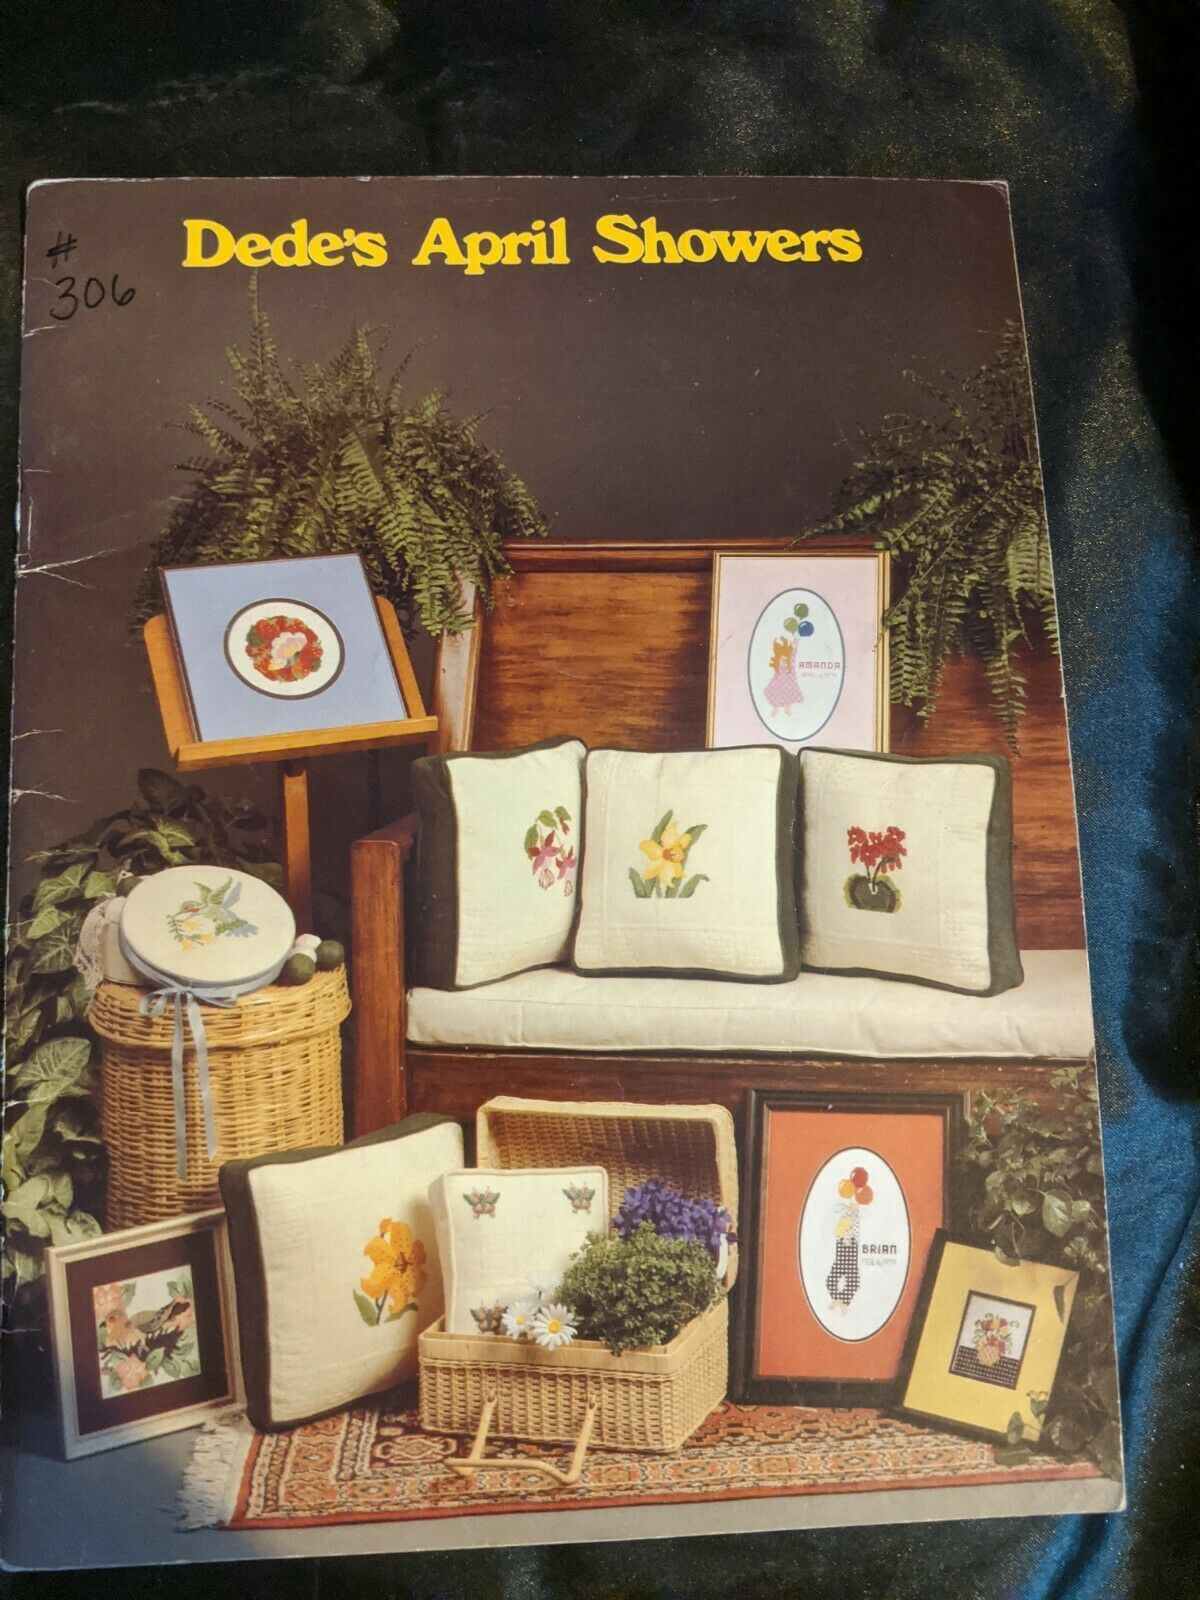 DEDE'S APRIL SHOWERS CROSS STITCH PATTERNS 1980 THE VANESSA-ANN COLLECTION  - $8.90